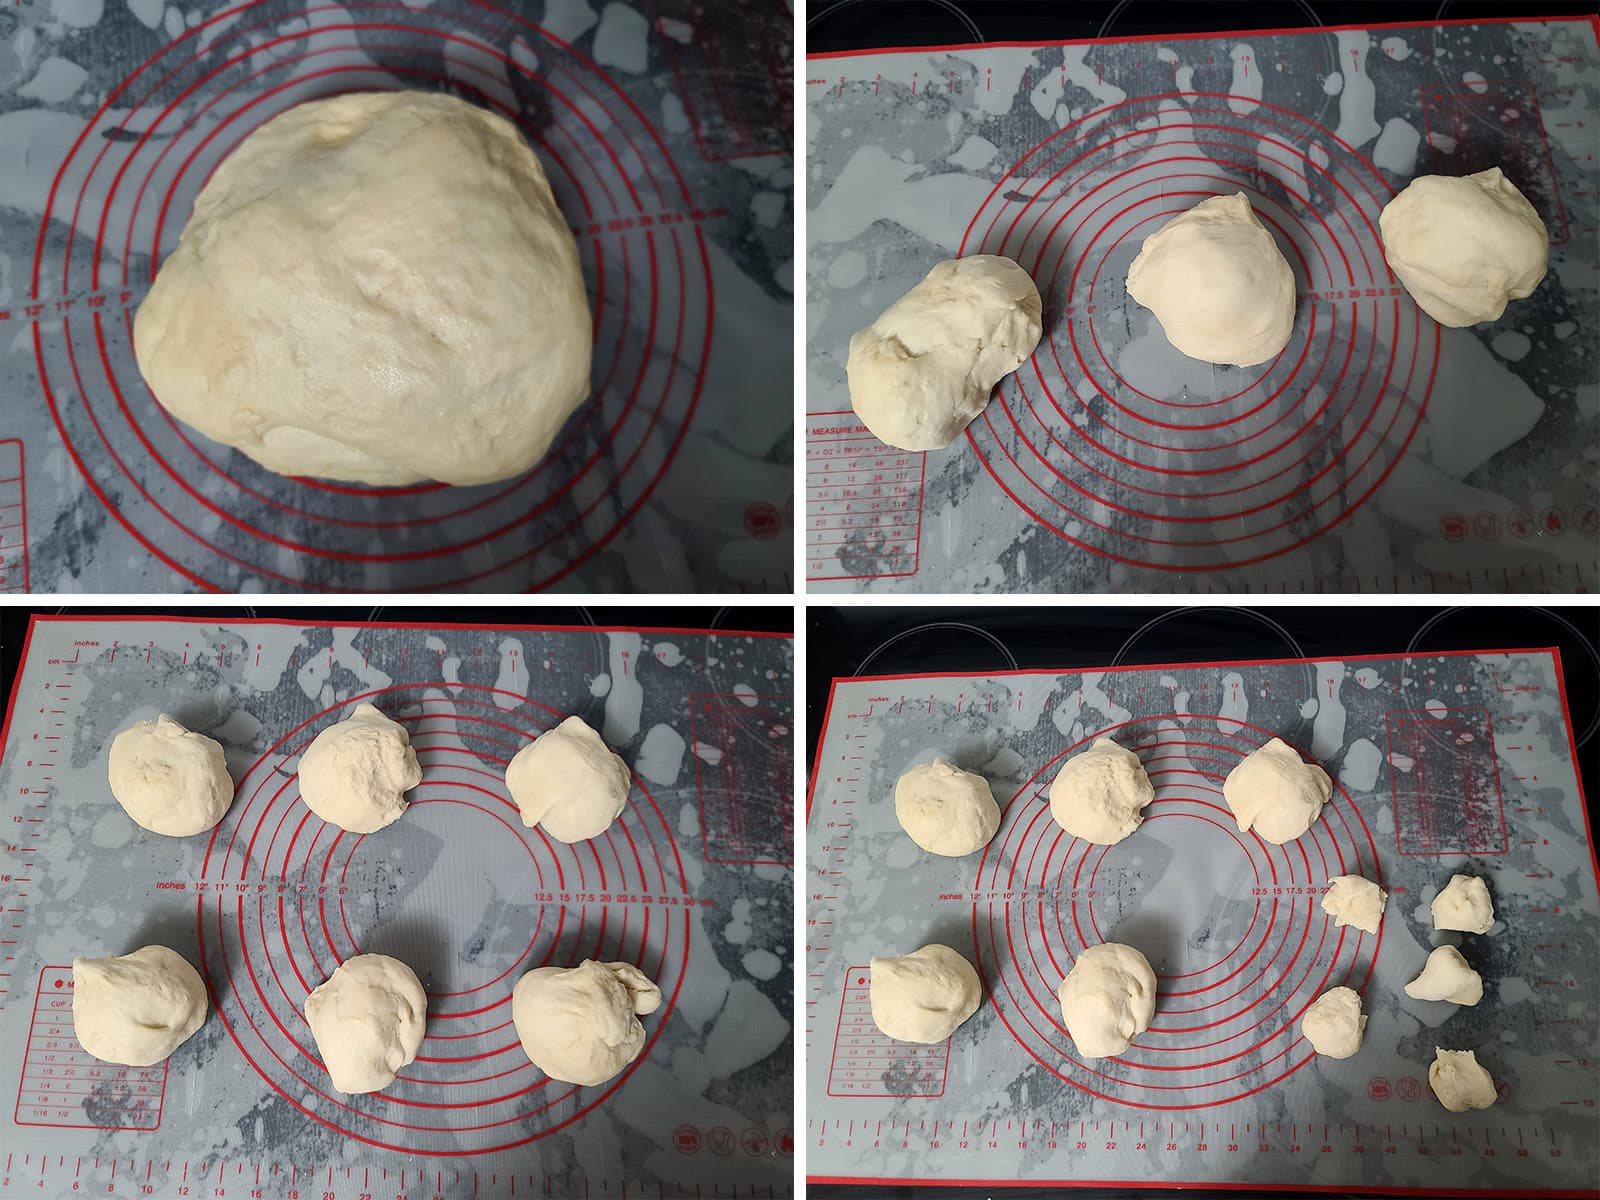 A 4 part image showing the dough ball being divided into 3, 6, then 30 pieces.